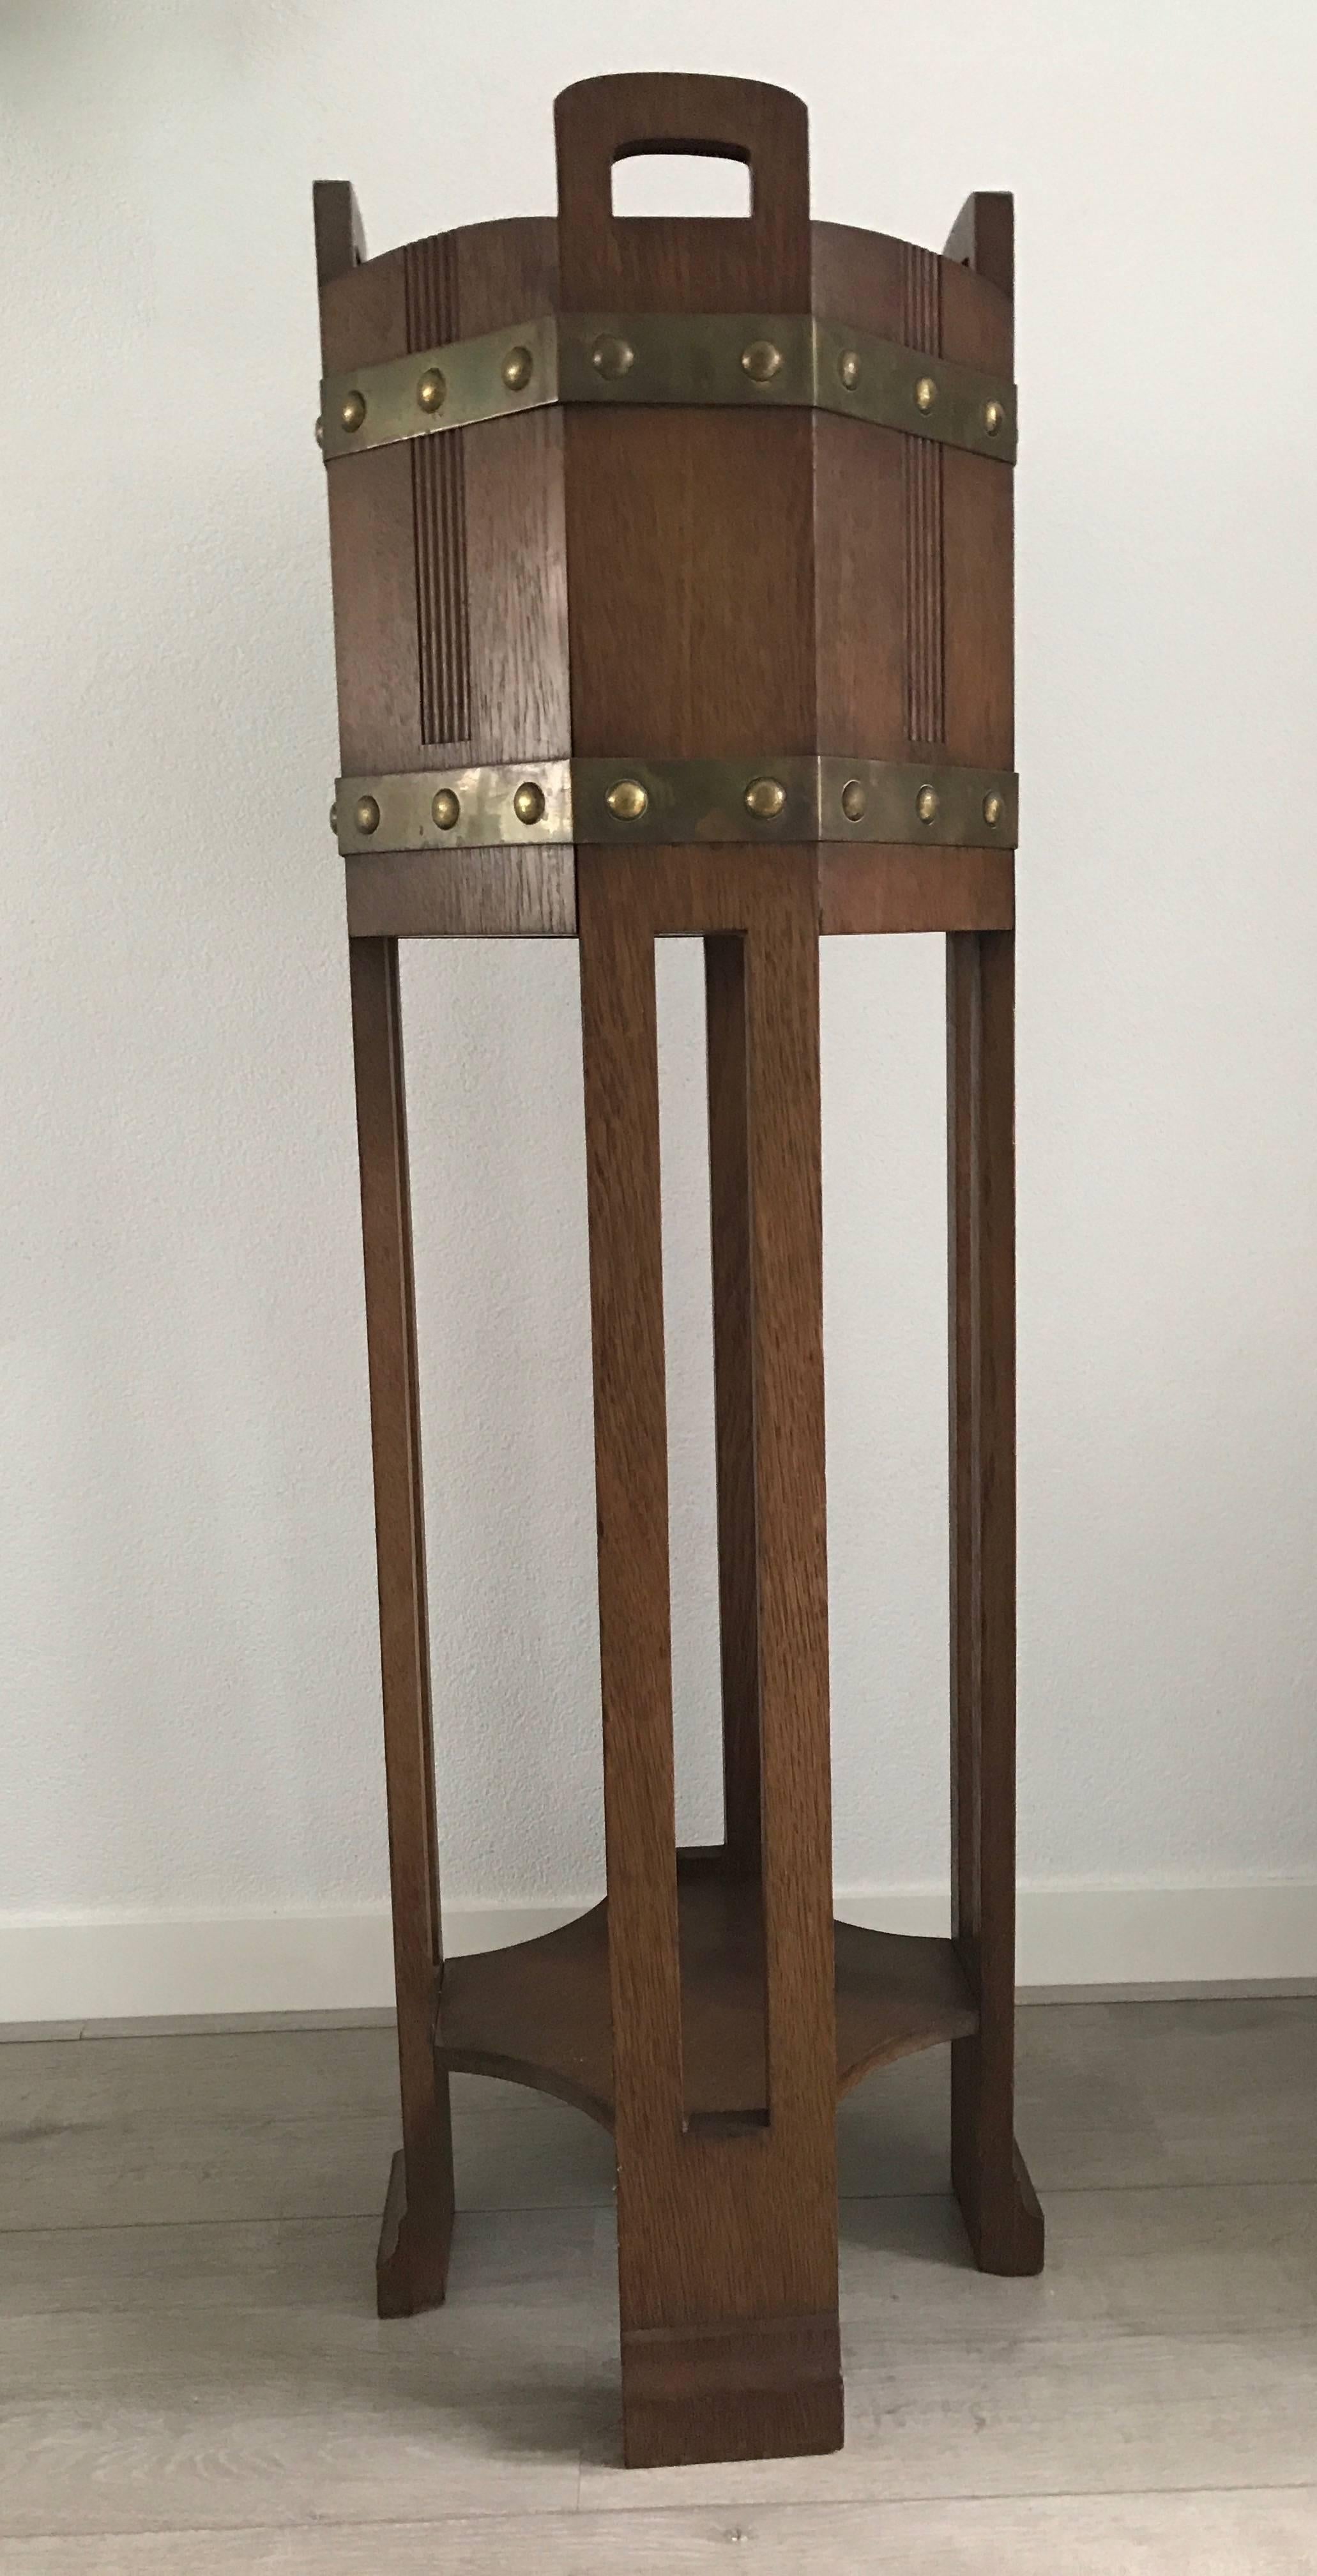 Handcrafted antique jardinière.

This early 20th century stand is a fine example of the craftsmanship and the wonderful designs of the Arts and Crafts movement. This rectangular design has a great patina and the combination with the copper bands